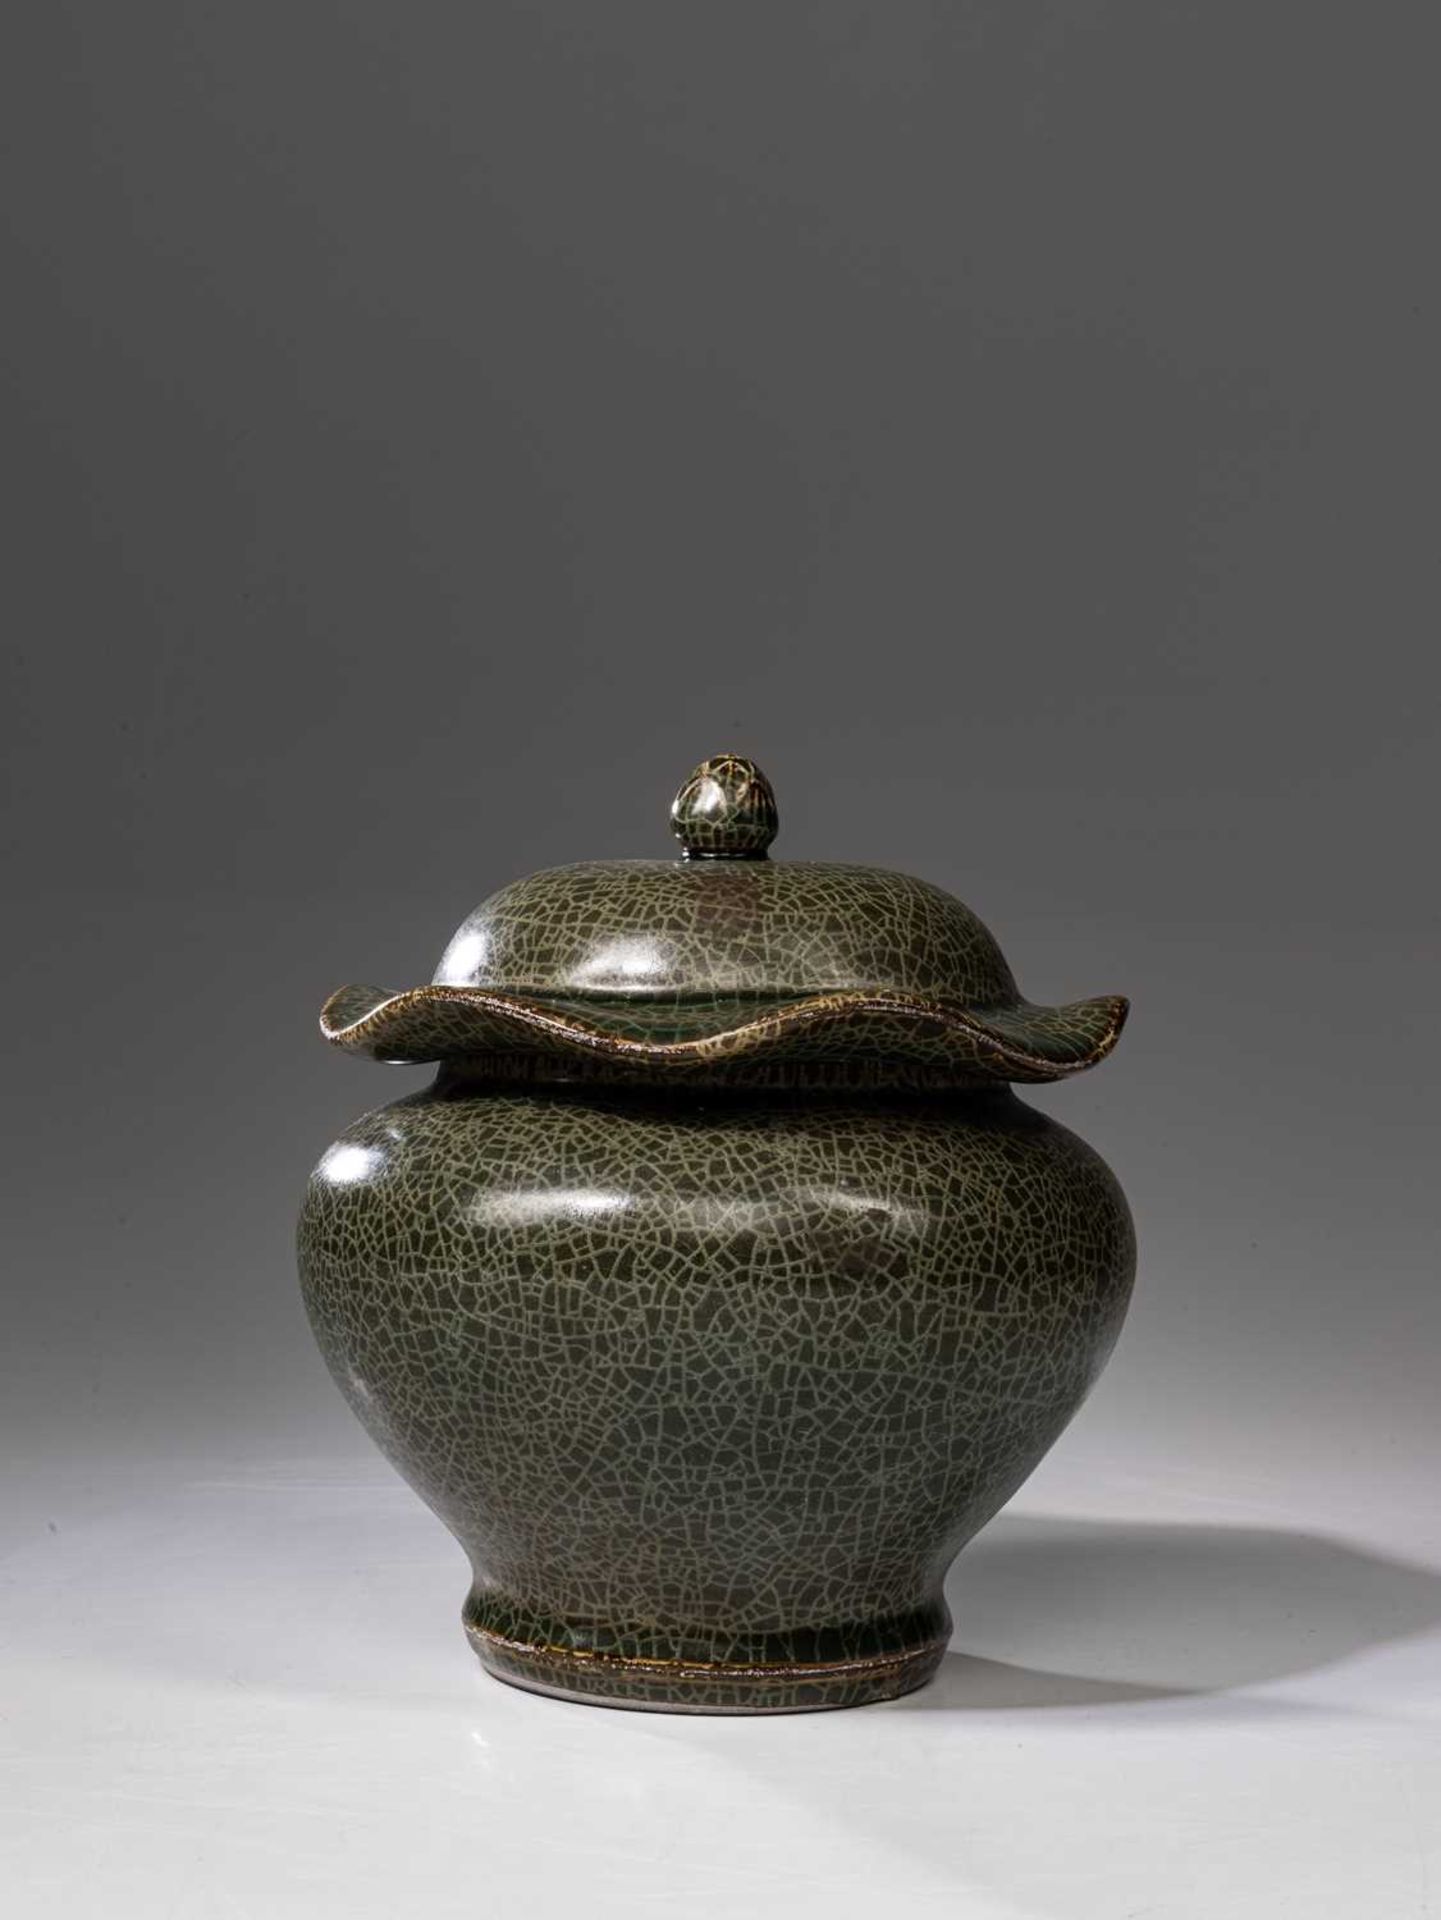 LOTUS SHAPED POT WITH LID - Image 3 of 5